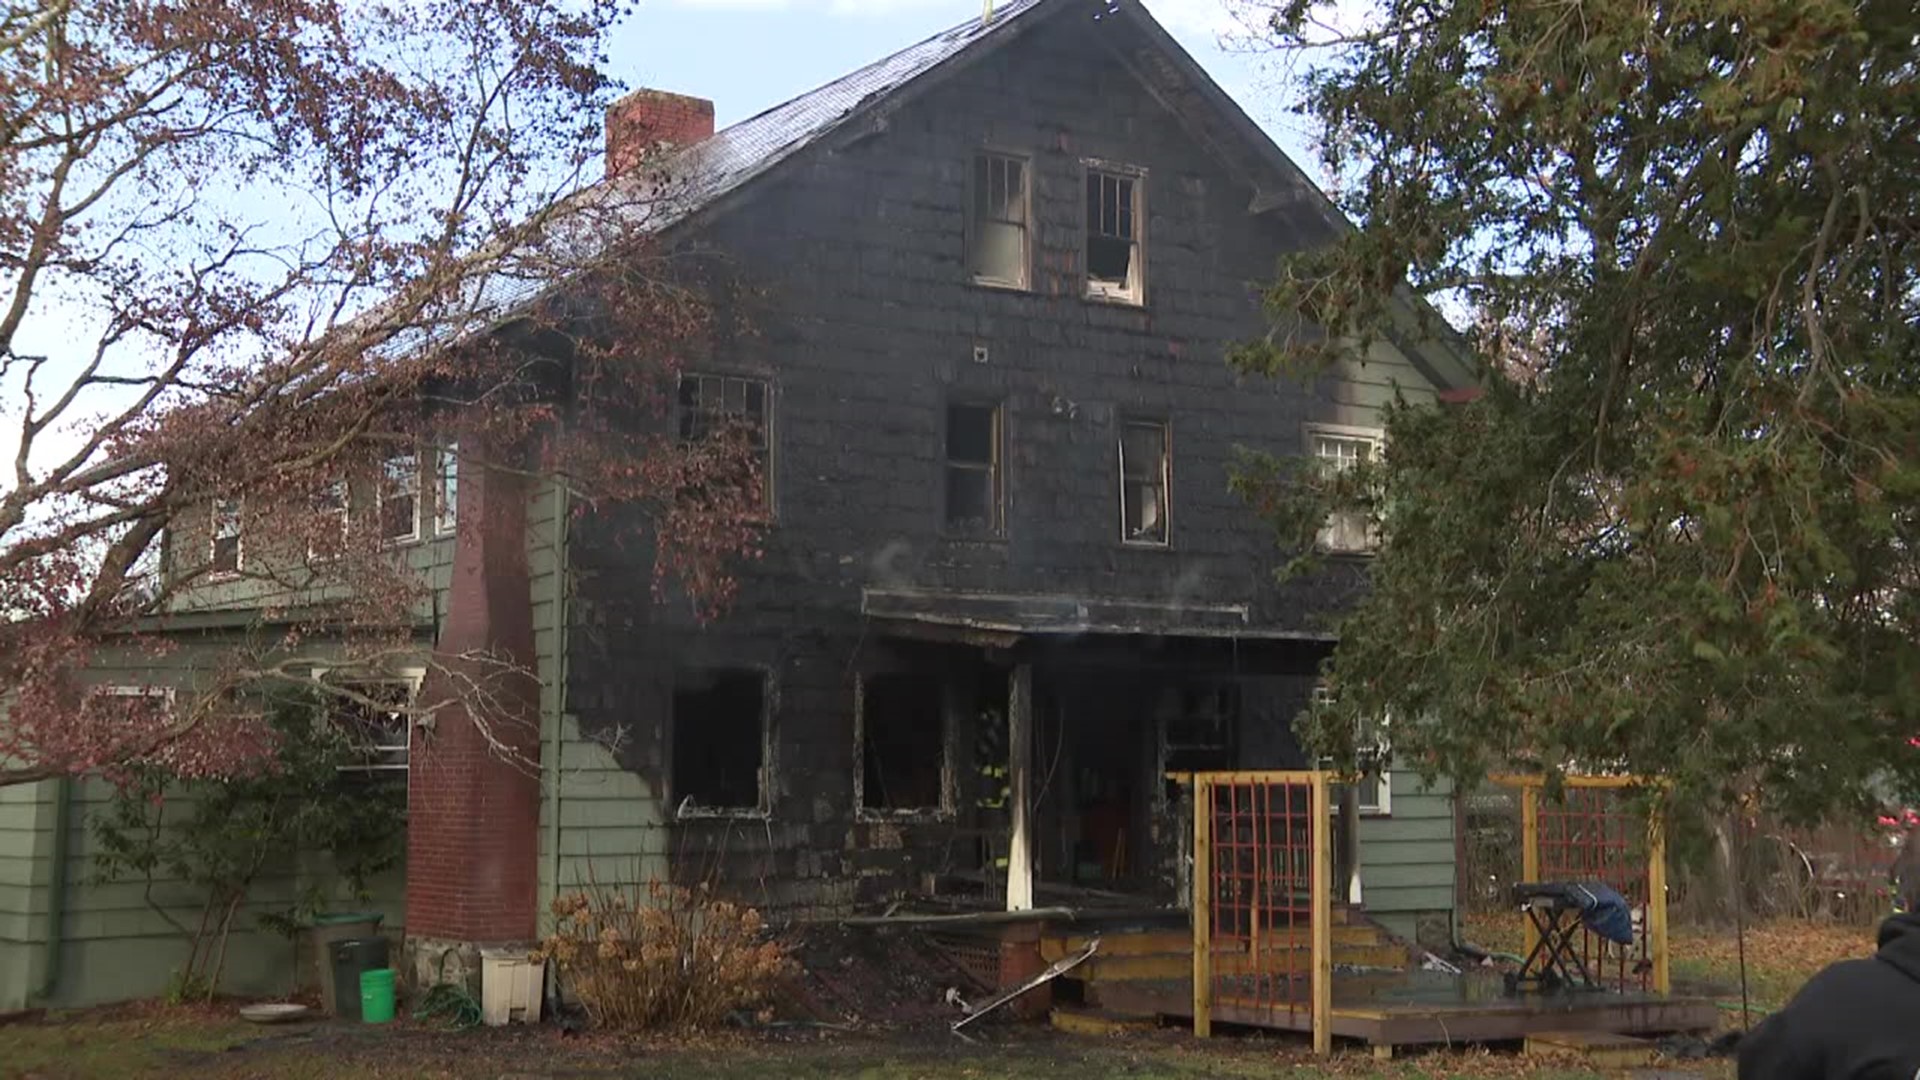 The blaze broke out around 2 p.m. Friday in a home on Bryant Street.